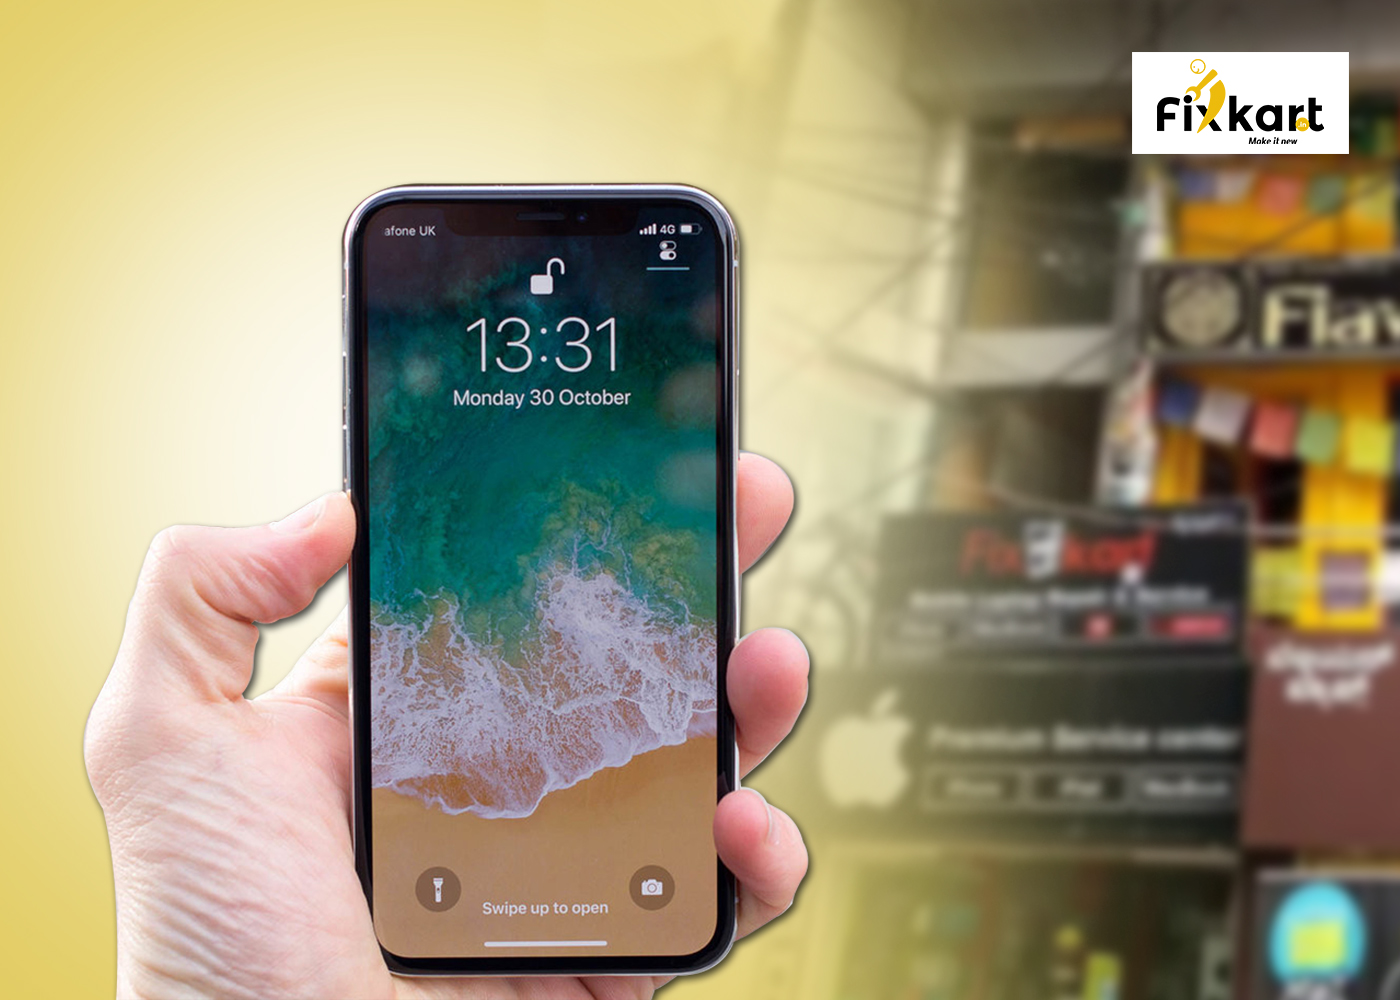 Did your Iphone X get cracked? Worry no more! We have some affordable solutions for you - Fixkart - Doorstep iPhone Repair | MacBook Repair